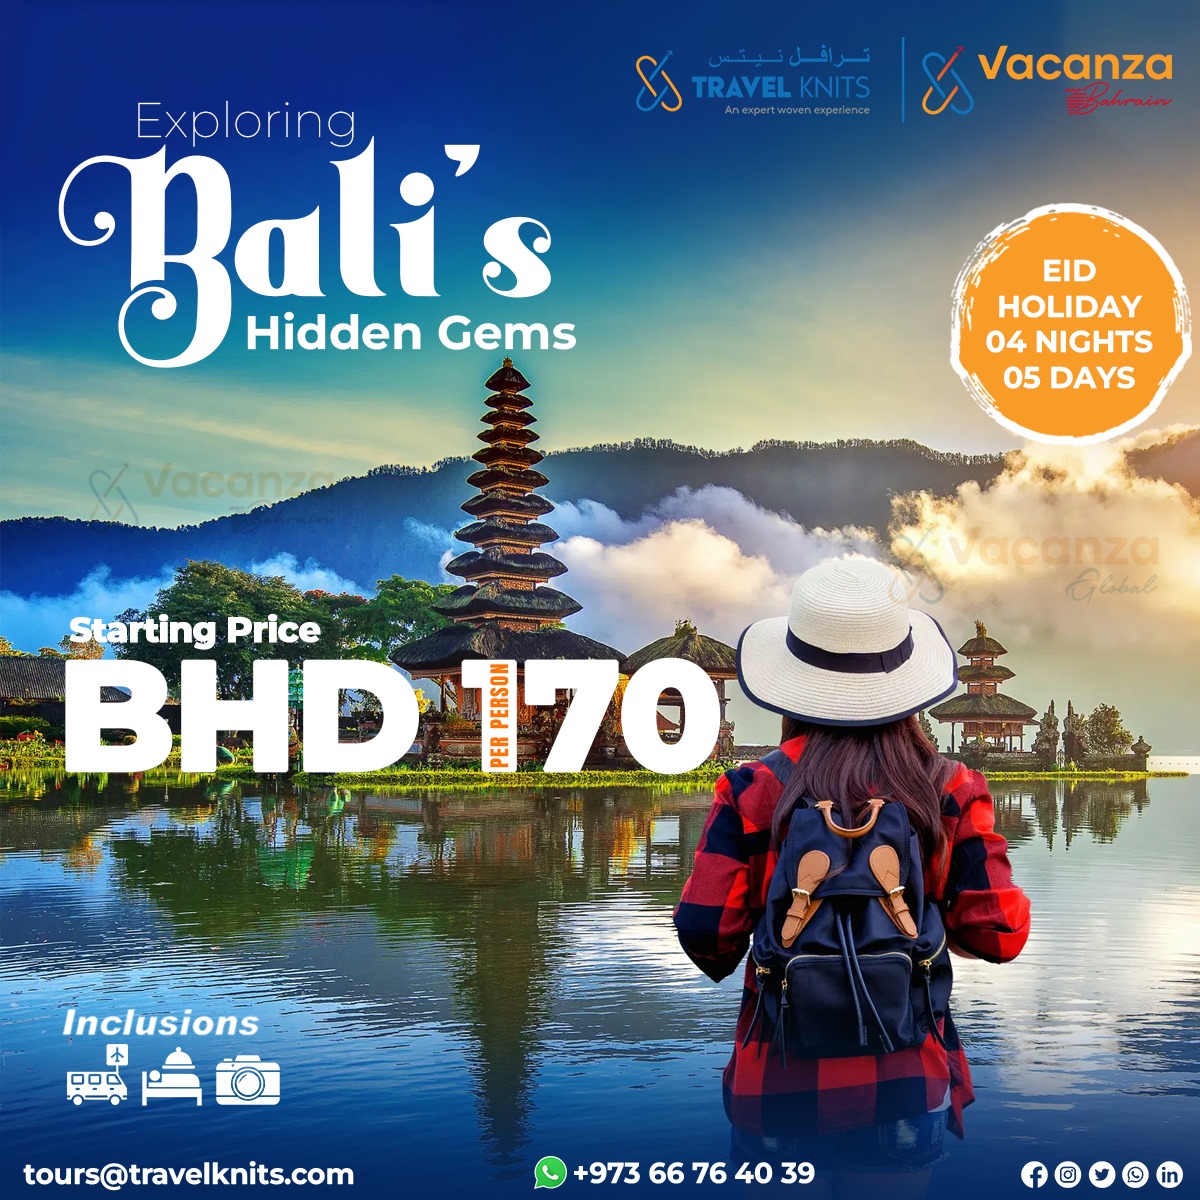 Eid holiday in Bali|IndonesiaTour Packages - Book honeymoon ,family,adventure tour packages to Indonesia|Travel Knits												